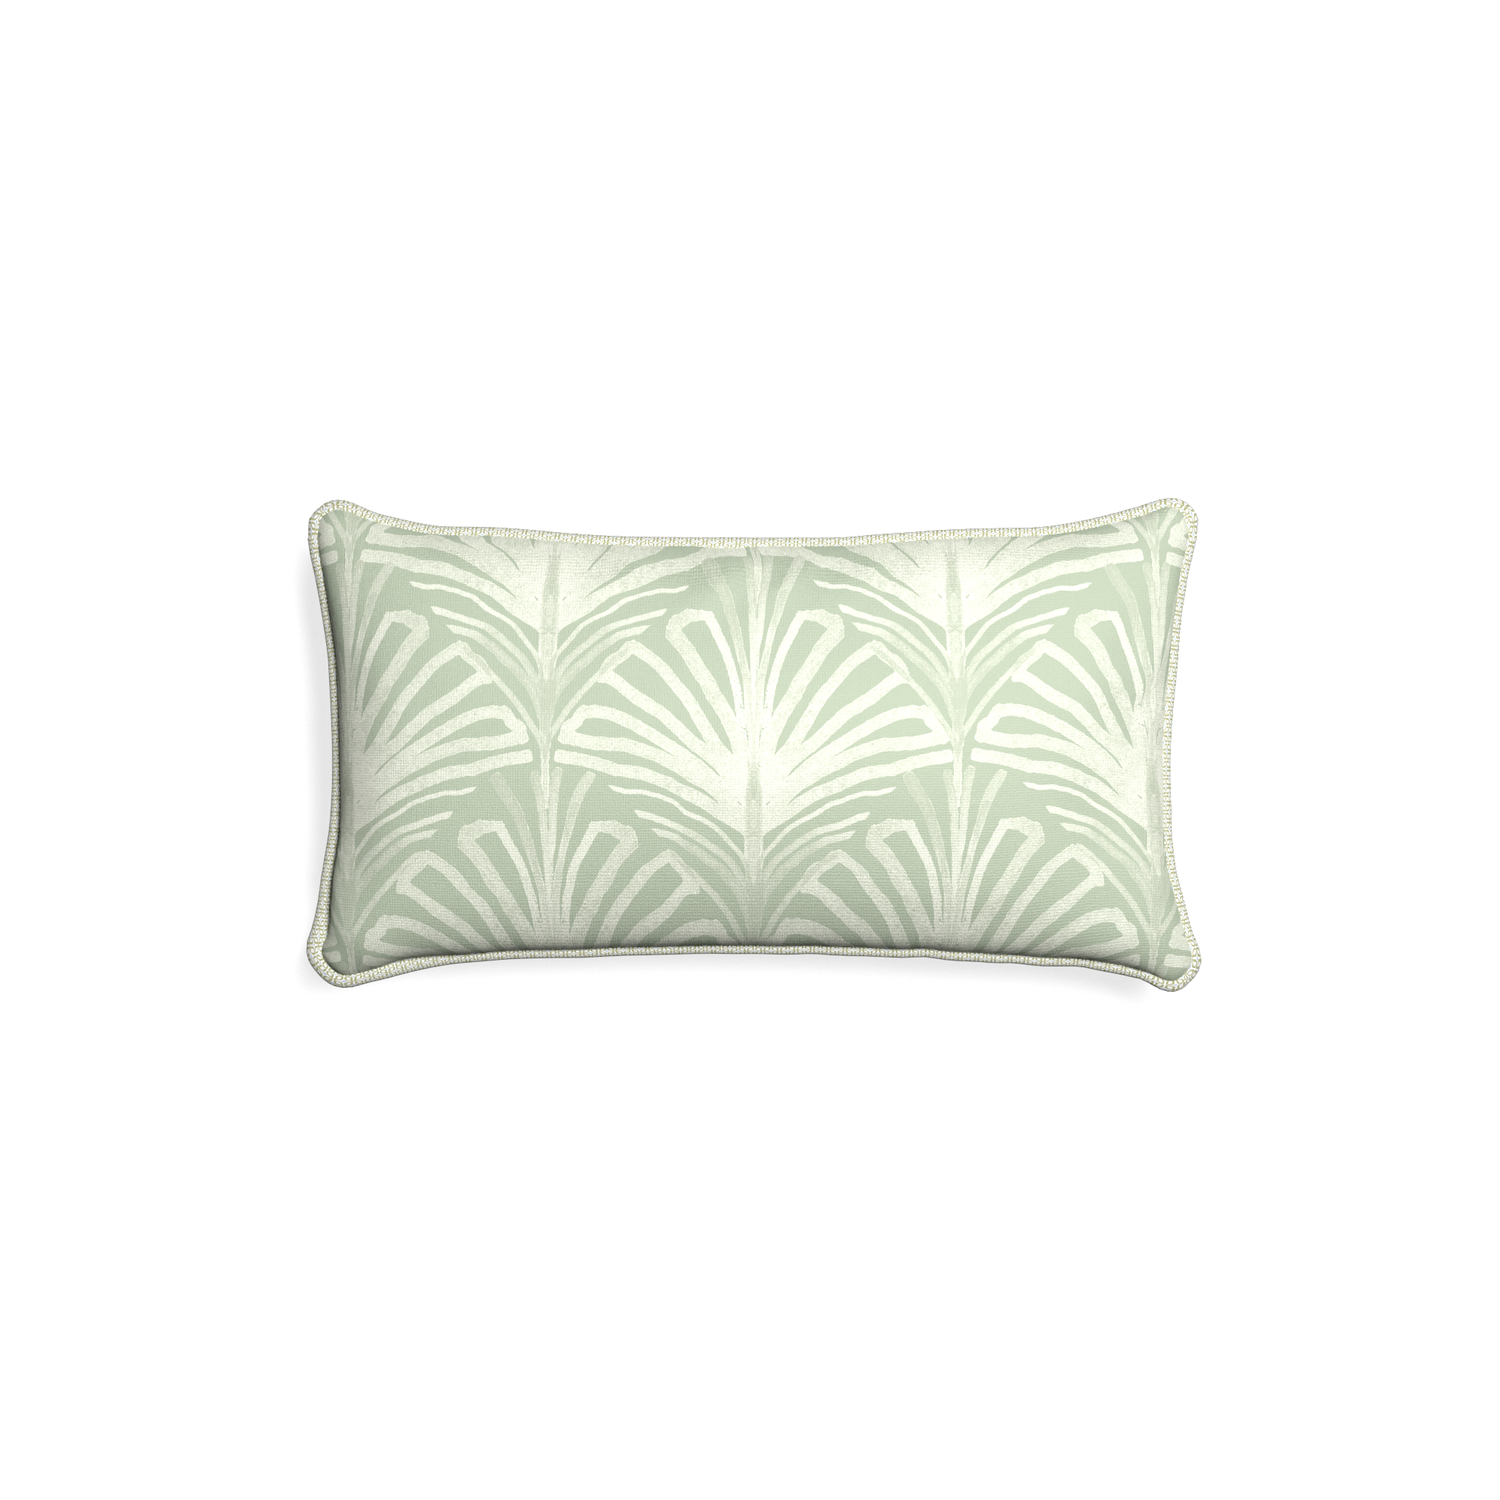 Petite-lumbar suzy sage custom sage green palmpillow with l piping on white background